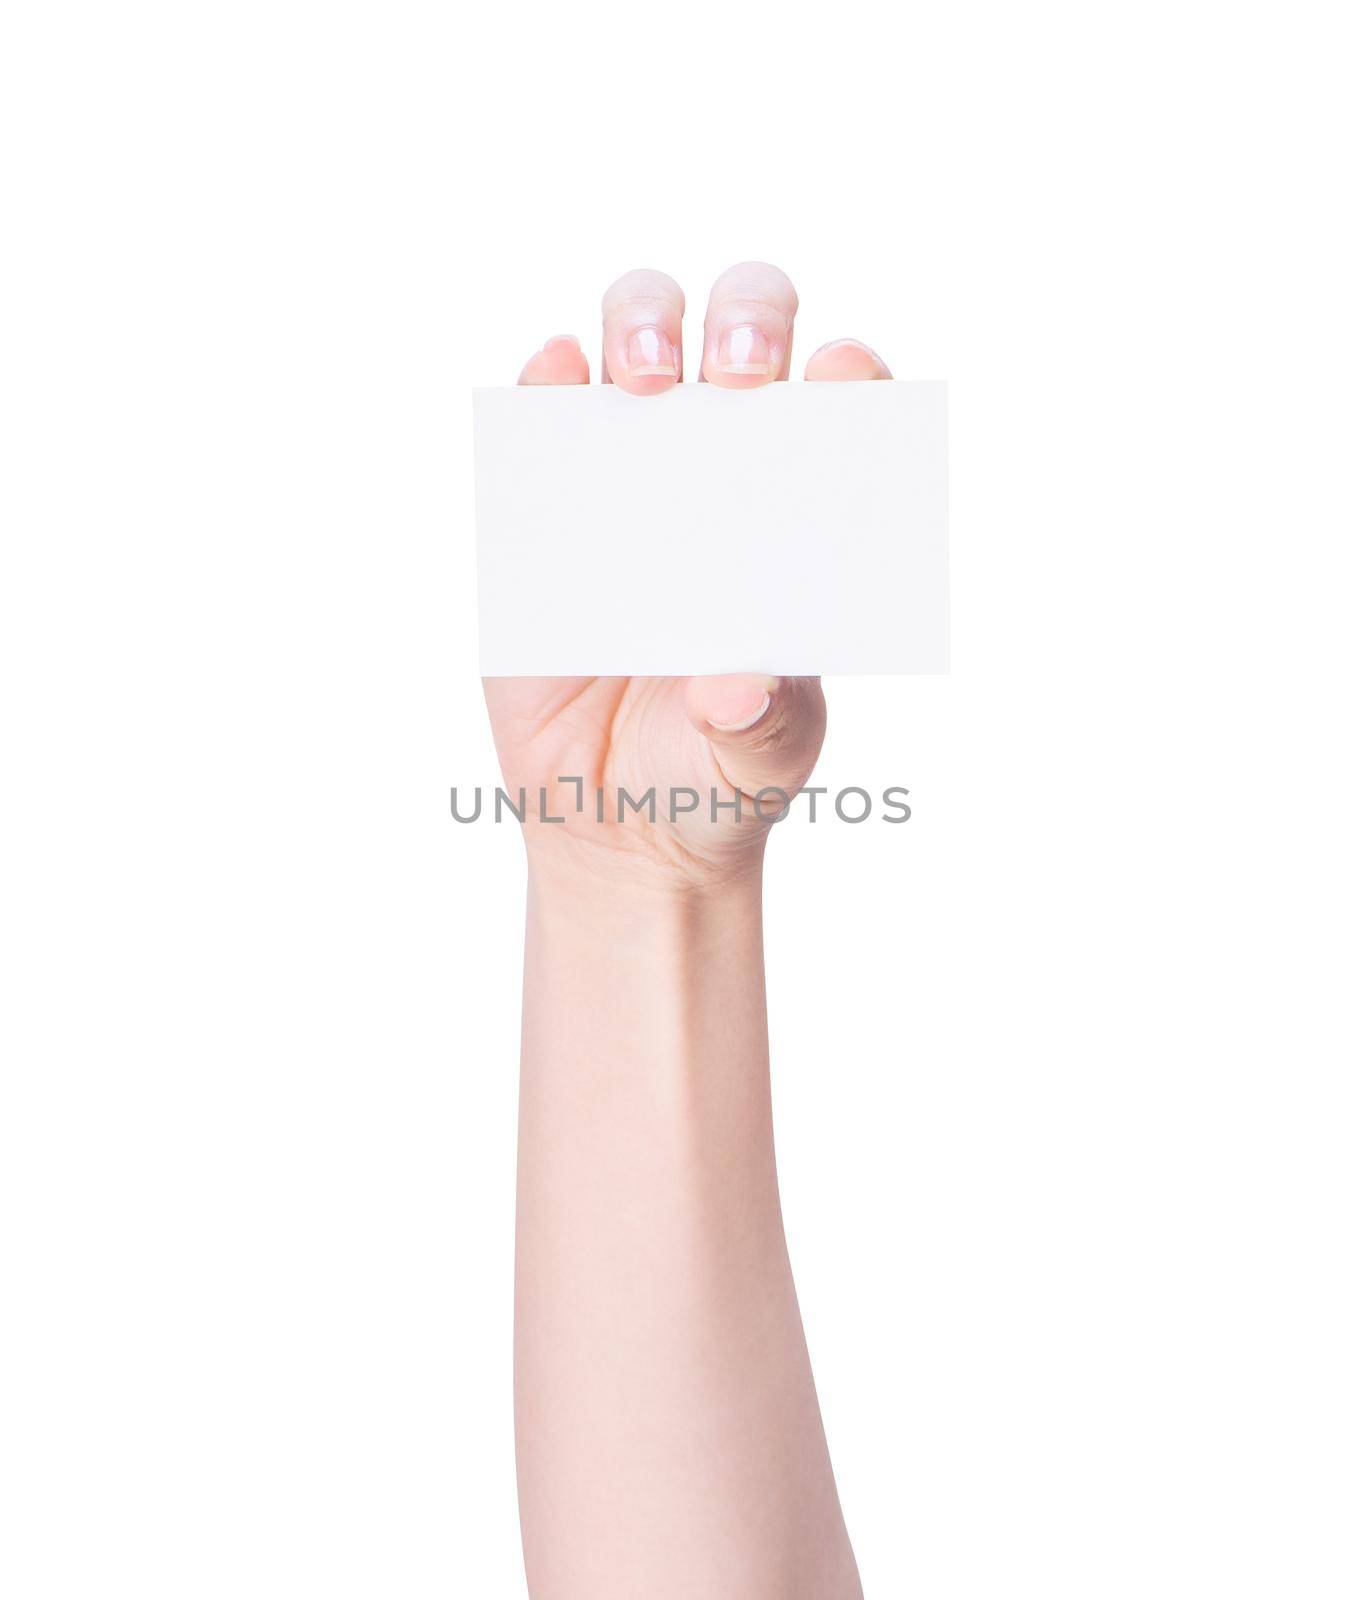 Young asia clean girl hand holding a blank kraft brown paper card template isolated on white background, clipping path, close up, mock up, cut out